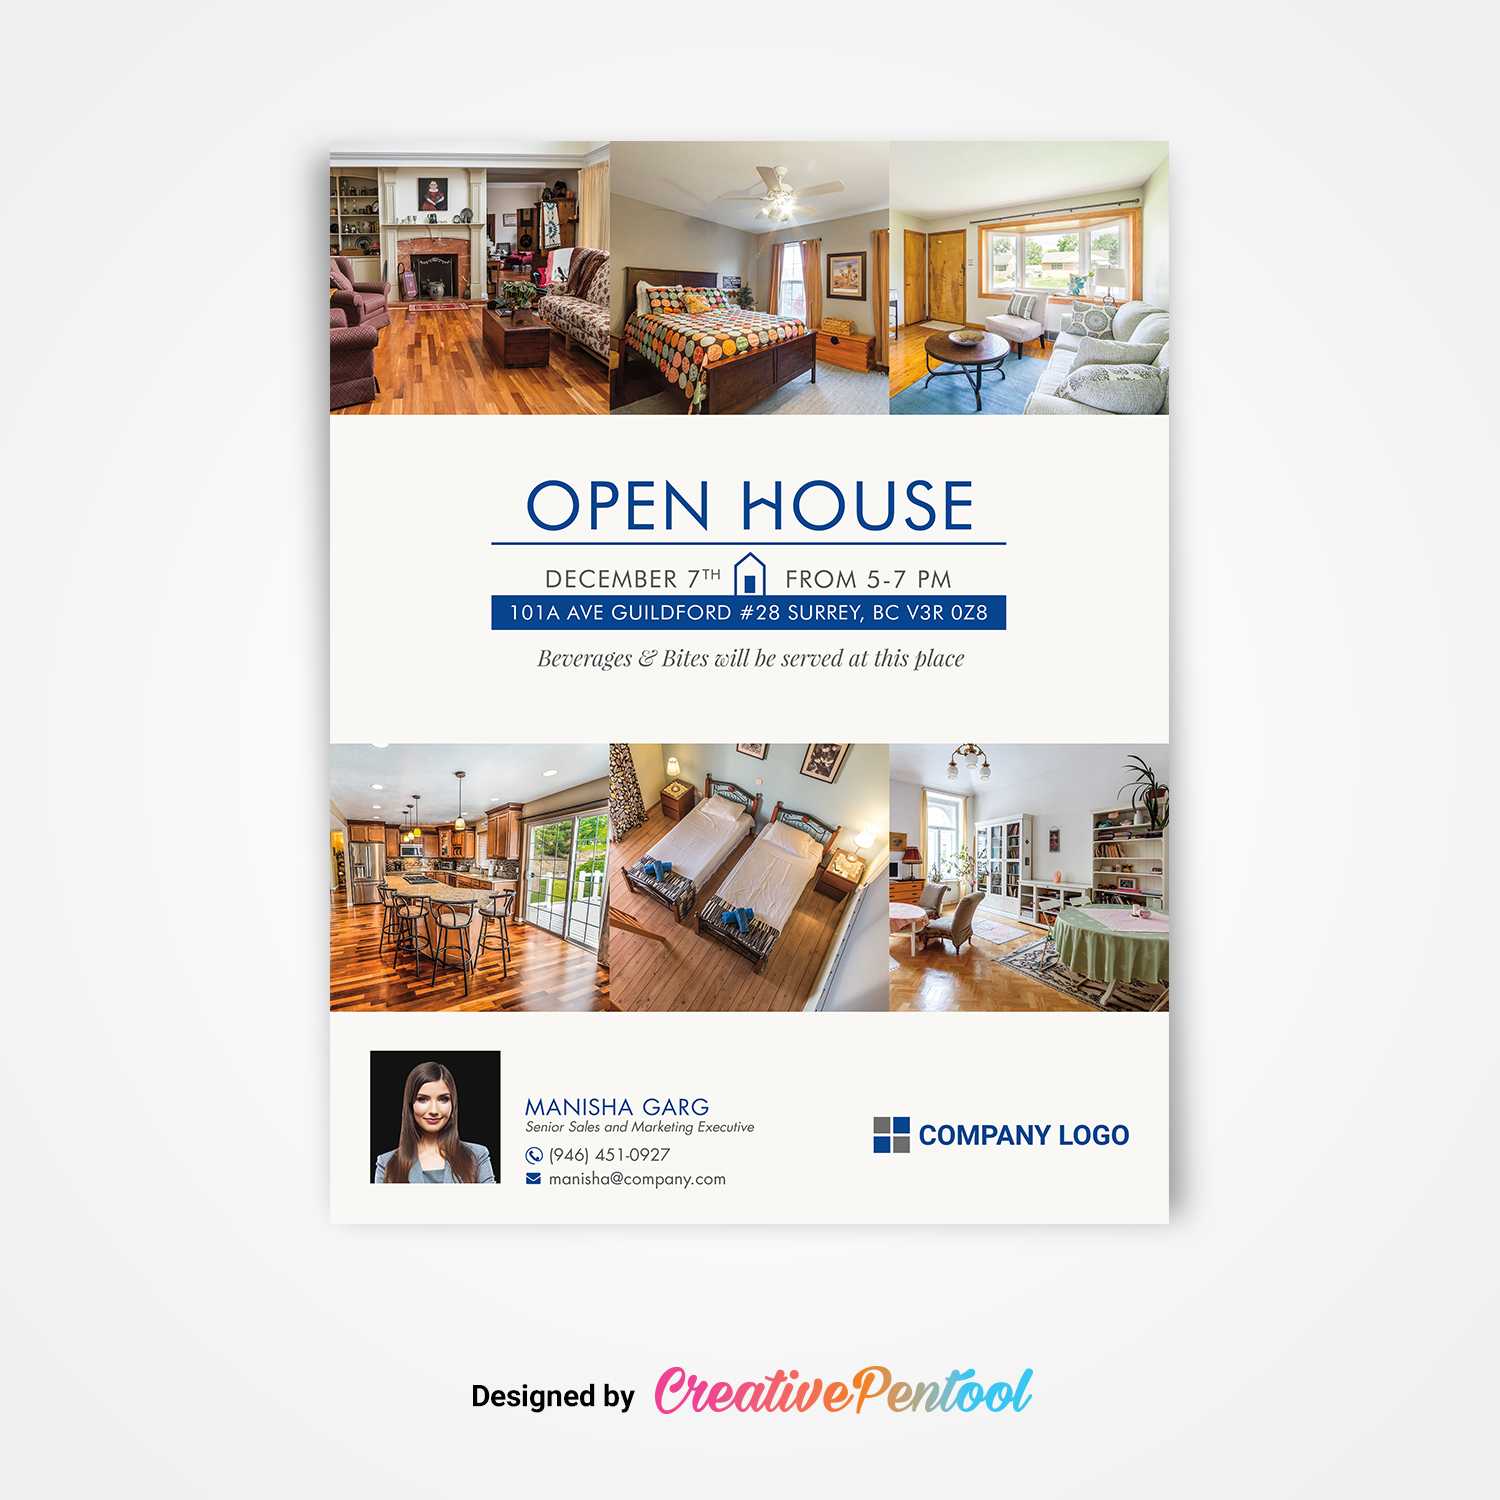 025 Business Flyers Template Free Ideas Open House Flyer Intended For Free Open House Flyer Template